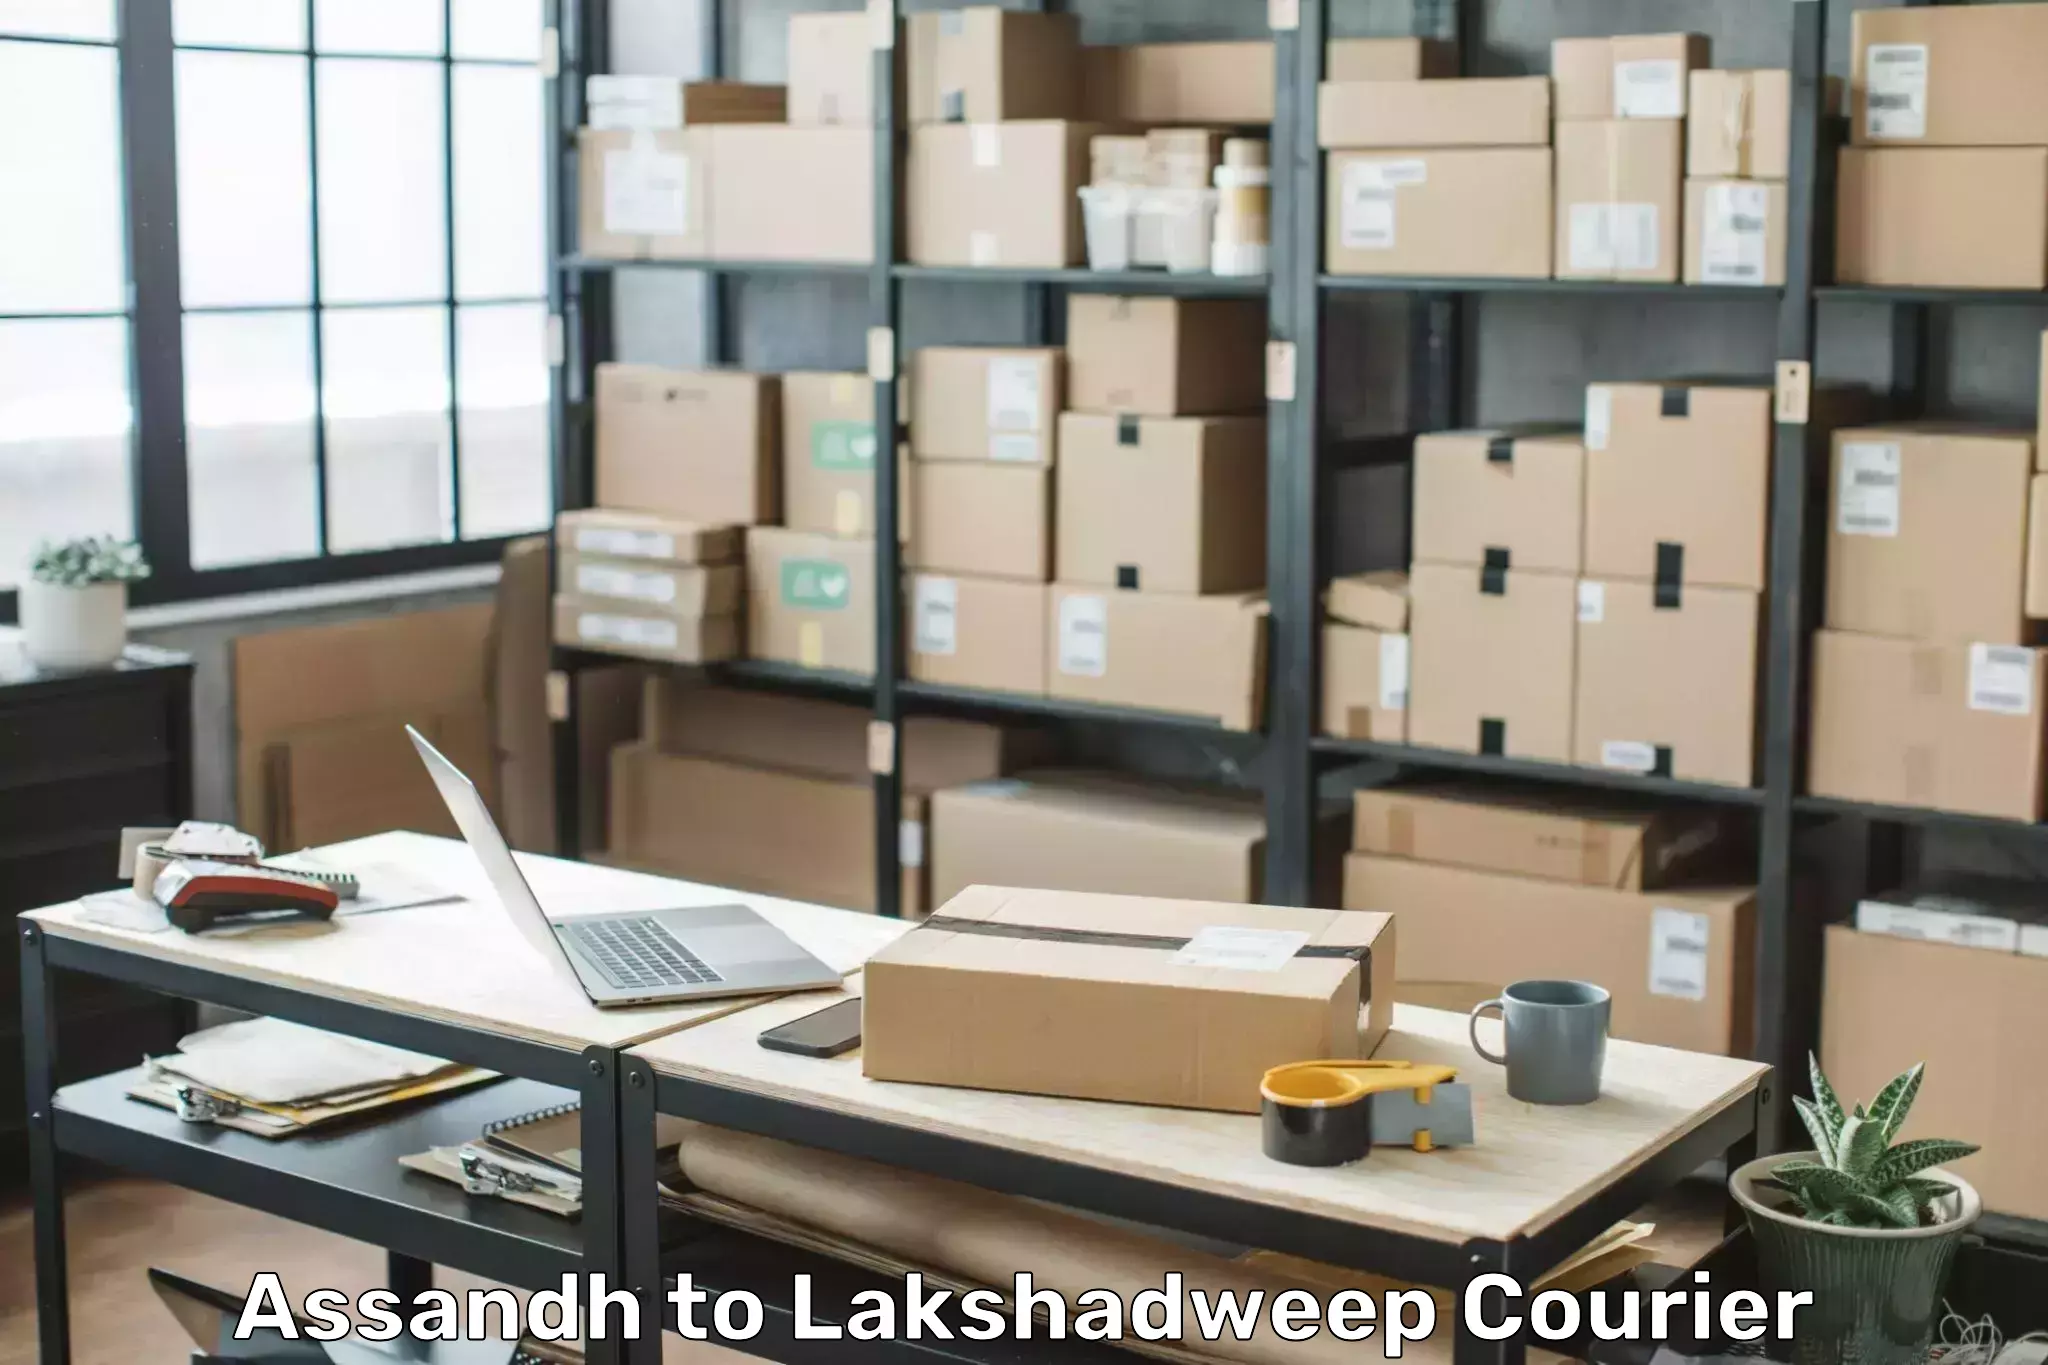 Doorstep luggage collection Assandh to Lakshadweep